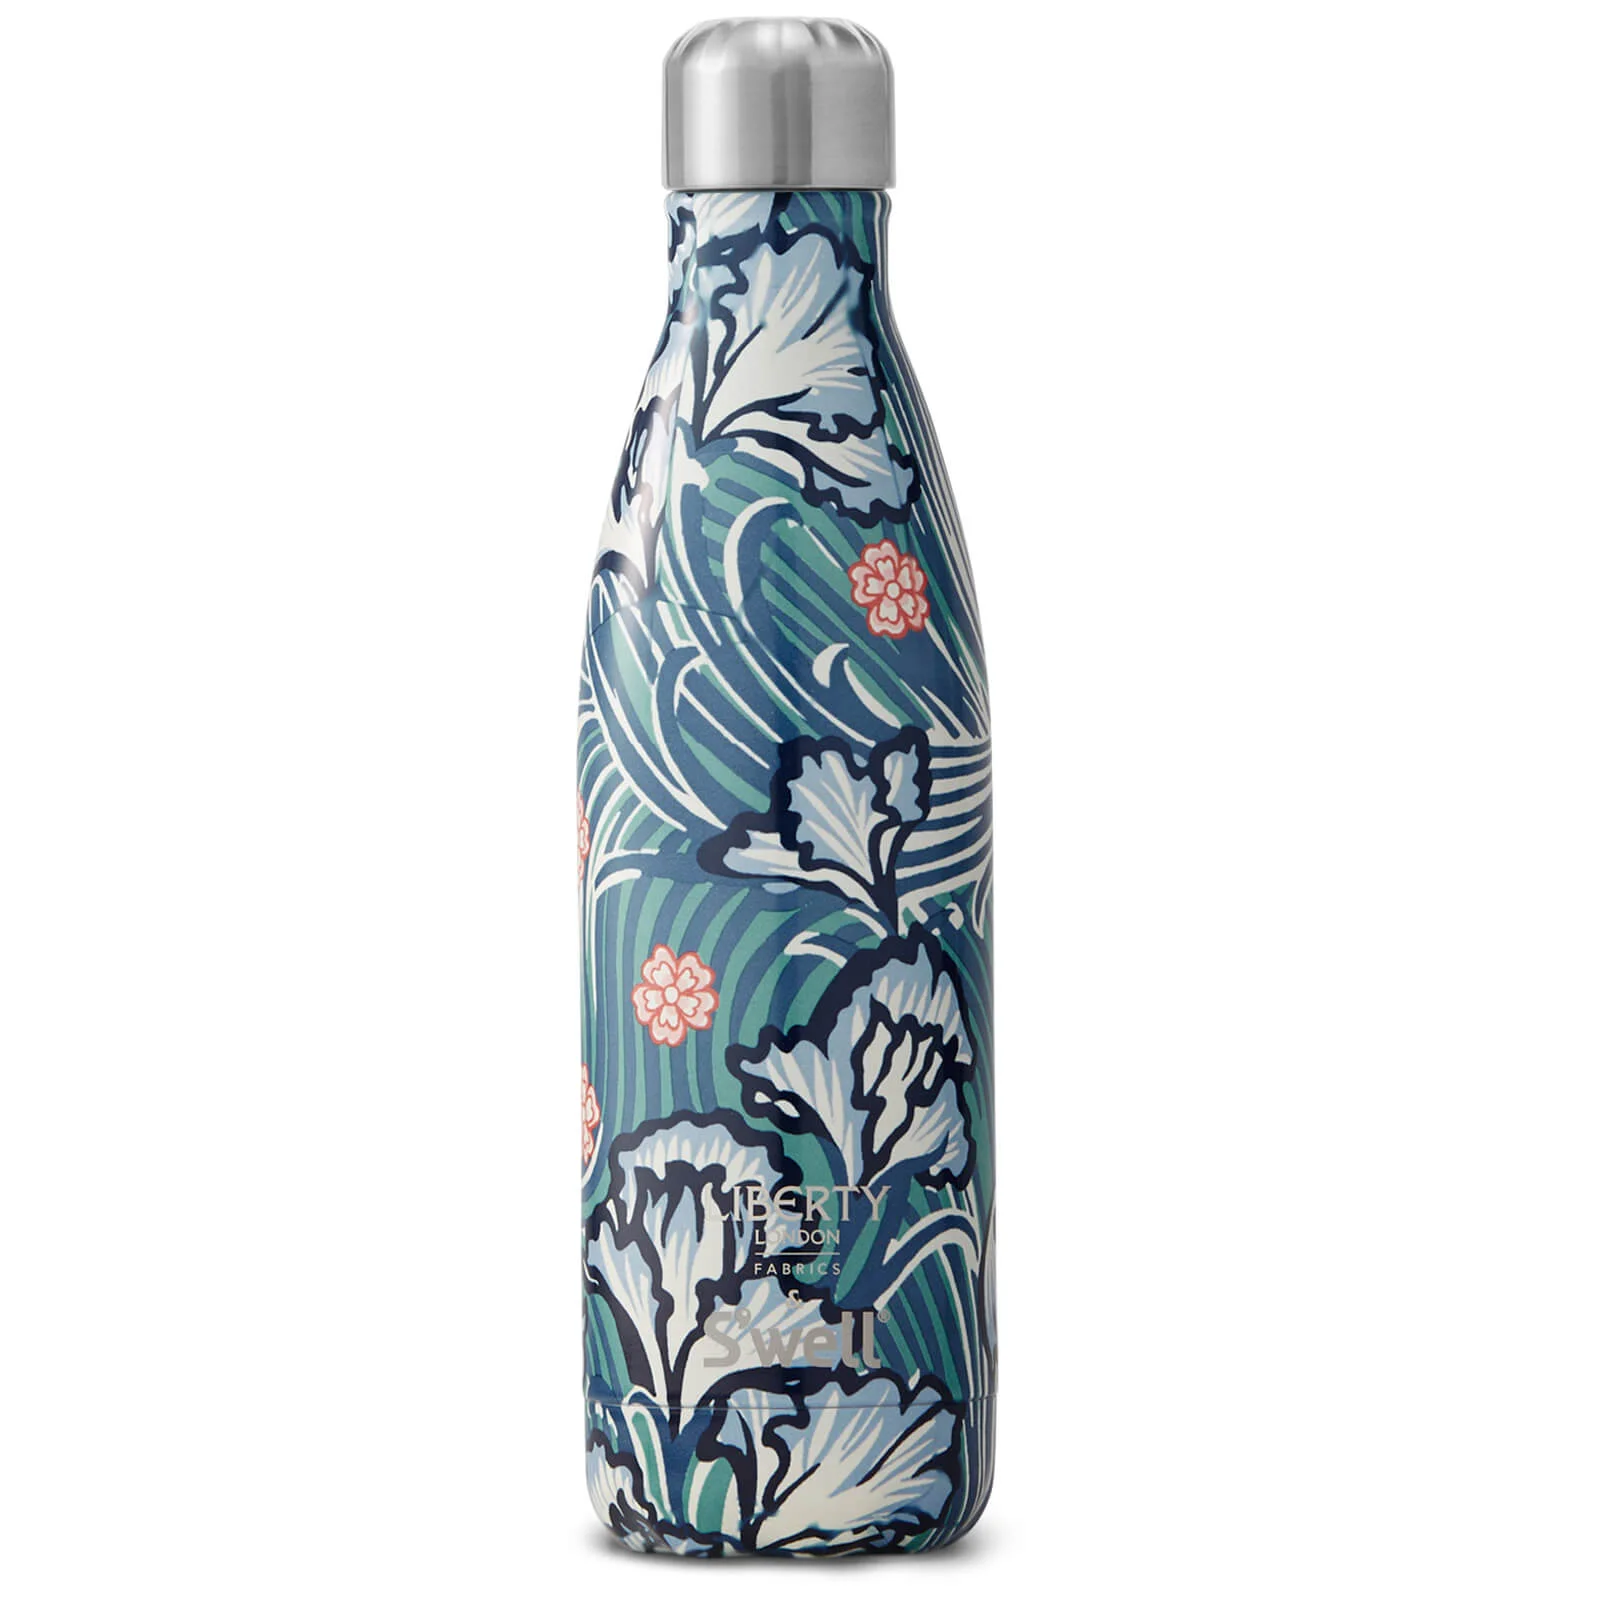 S'well Kyoto Water Bottle 500ml Image 1